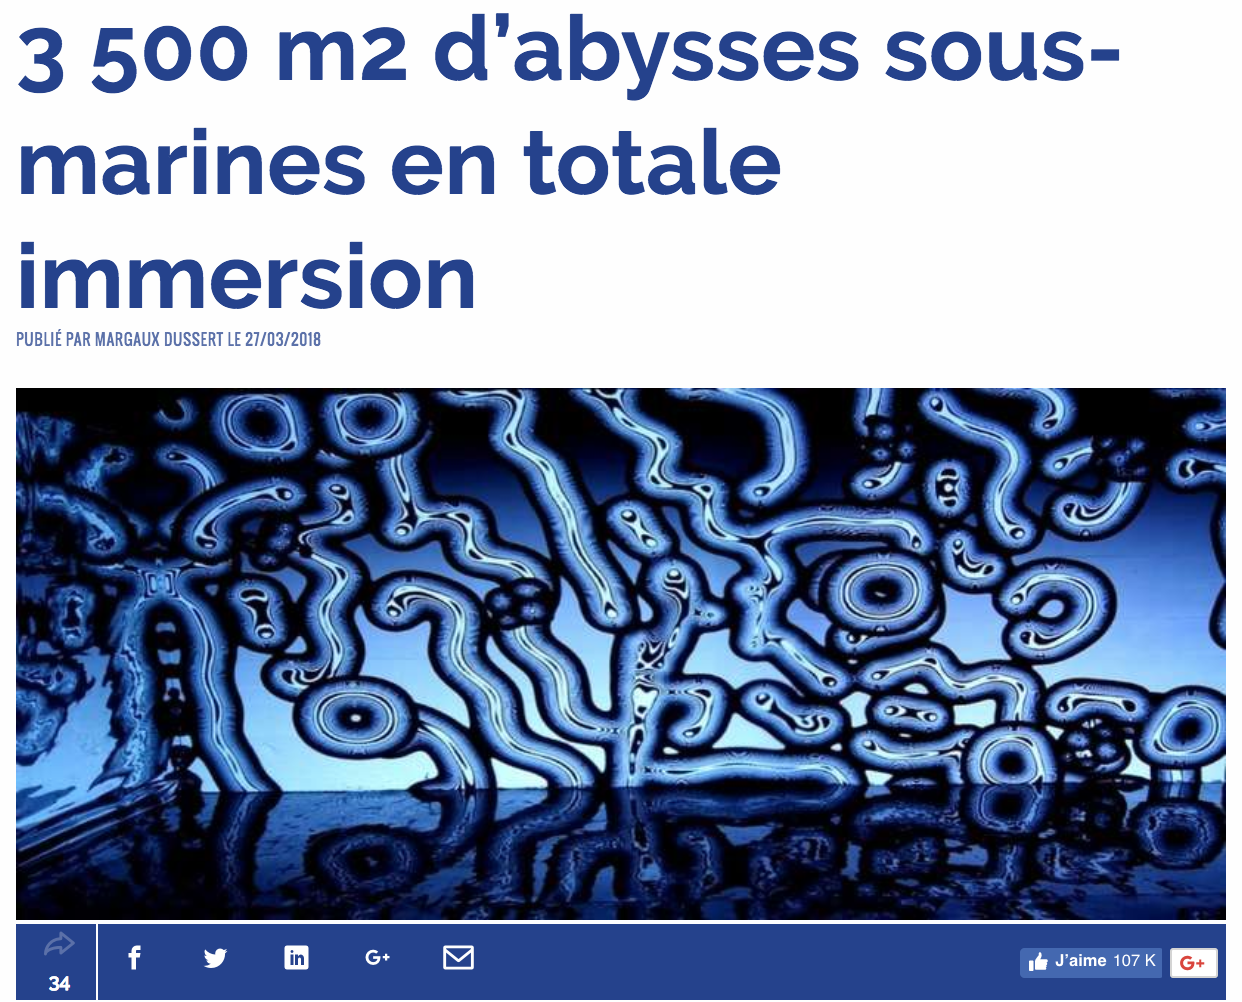 PRESS – L’ADN : 3,500 sqm of underwater abysses in total immersion